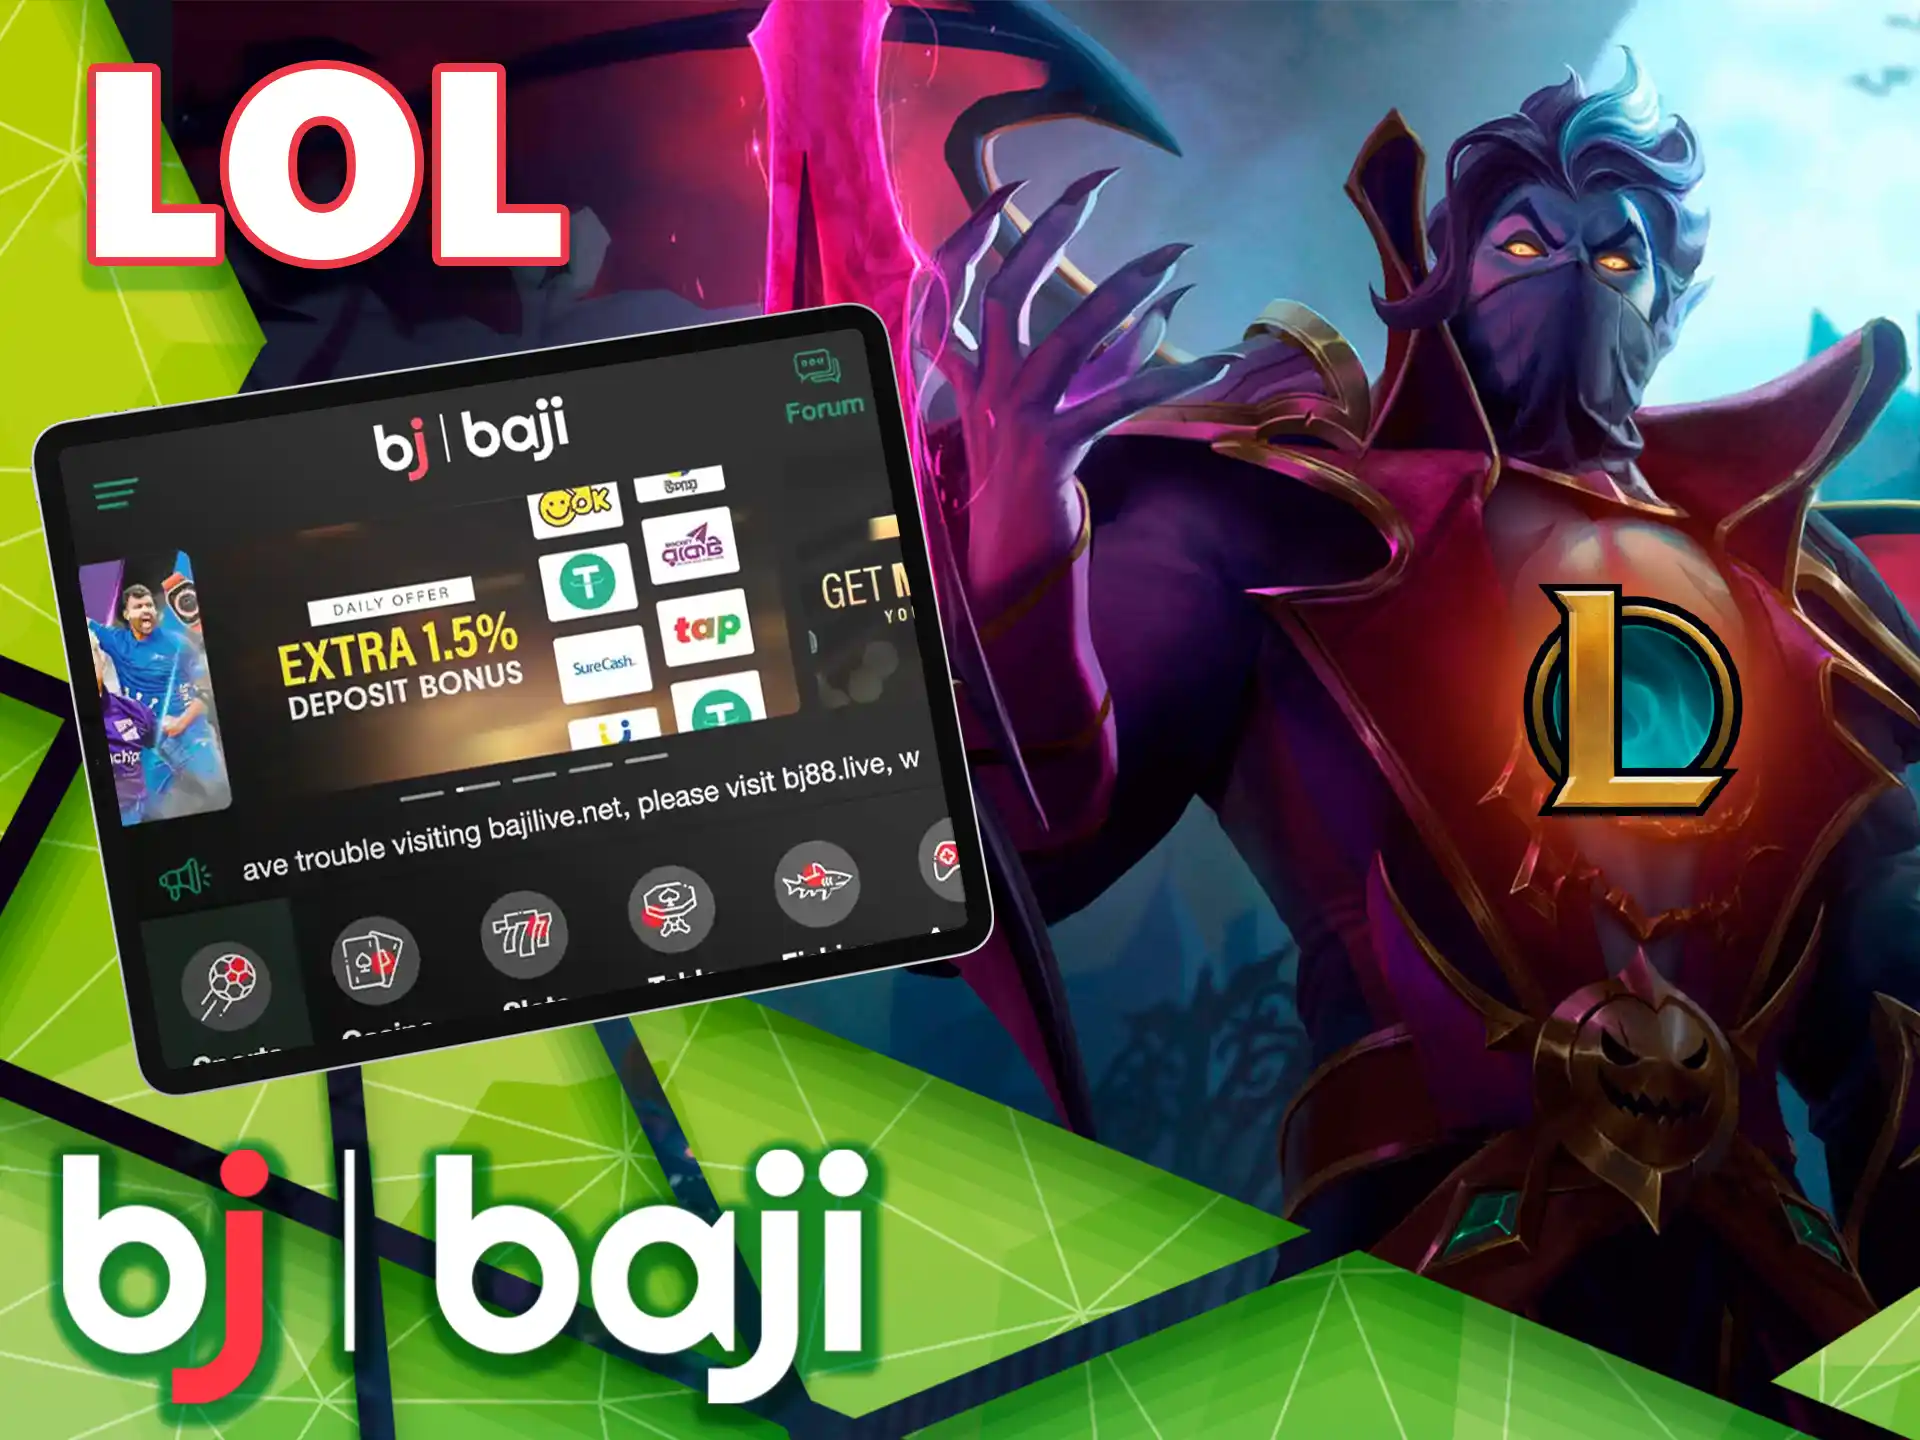 If you are a fan of the mobile games, a lot of great tournaments that will surprise you are available at Baji.